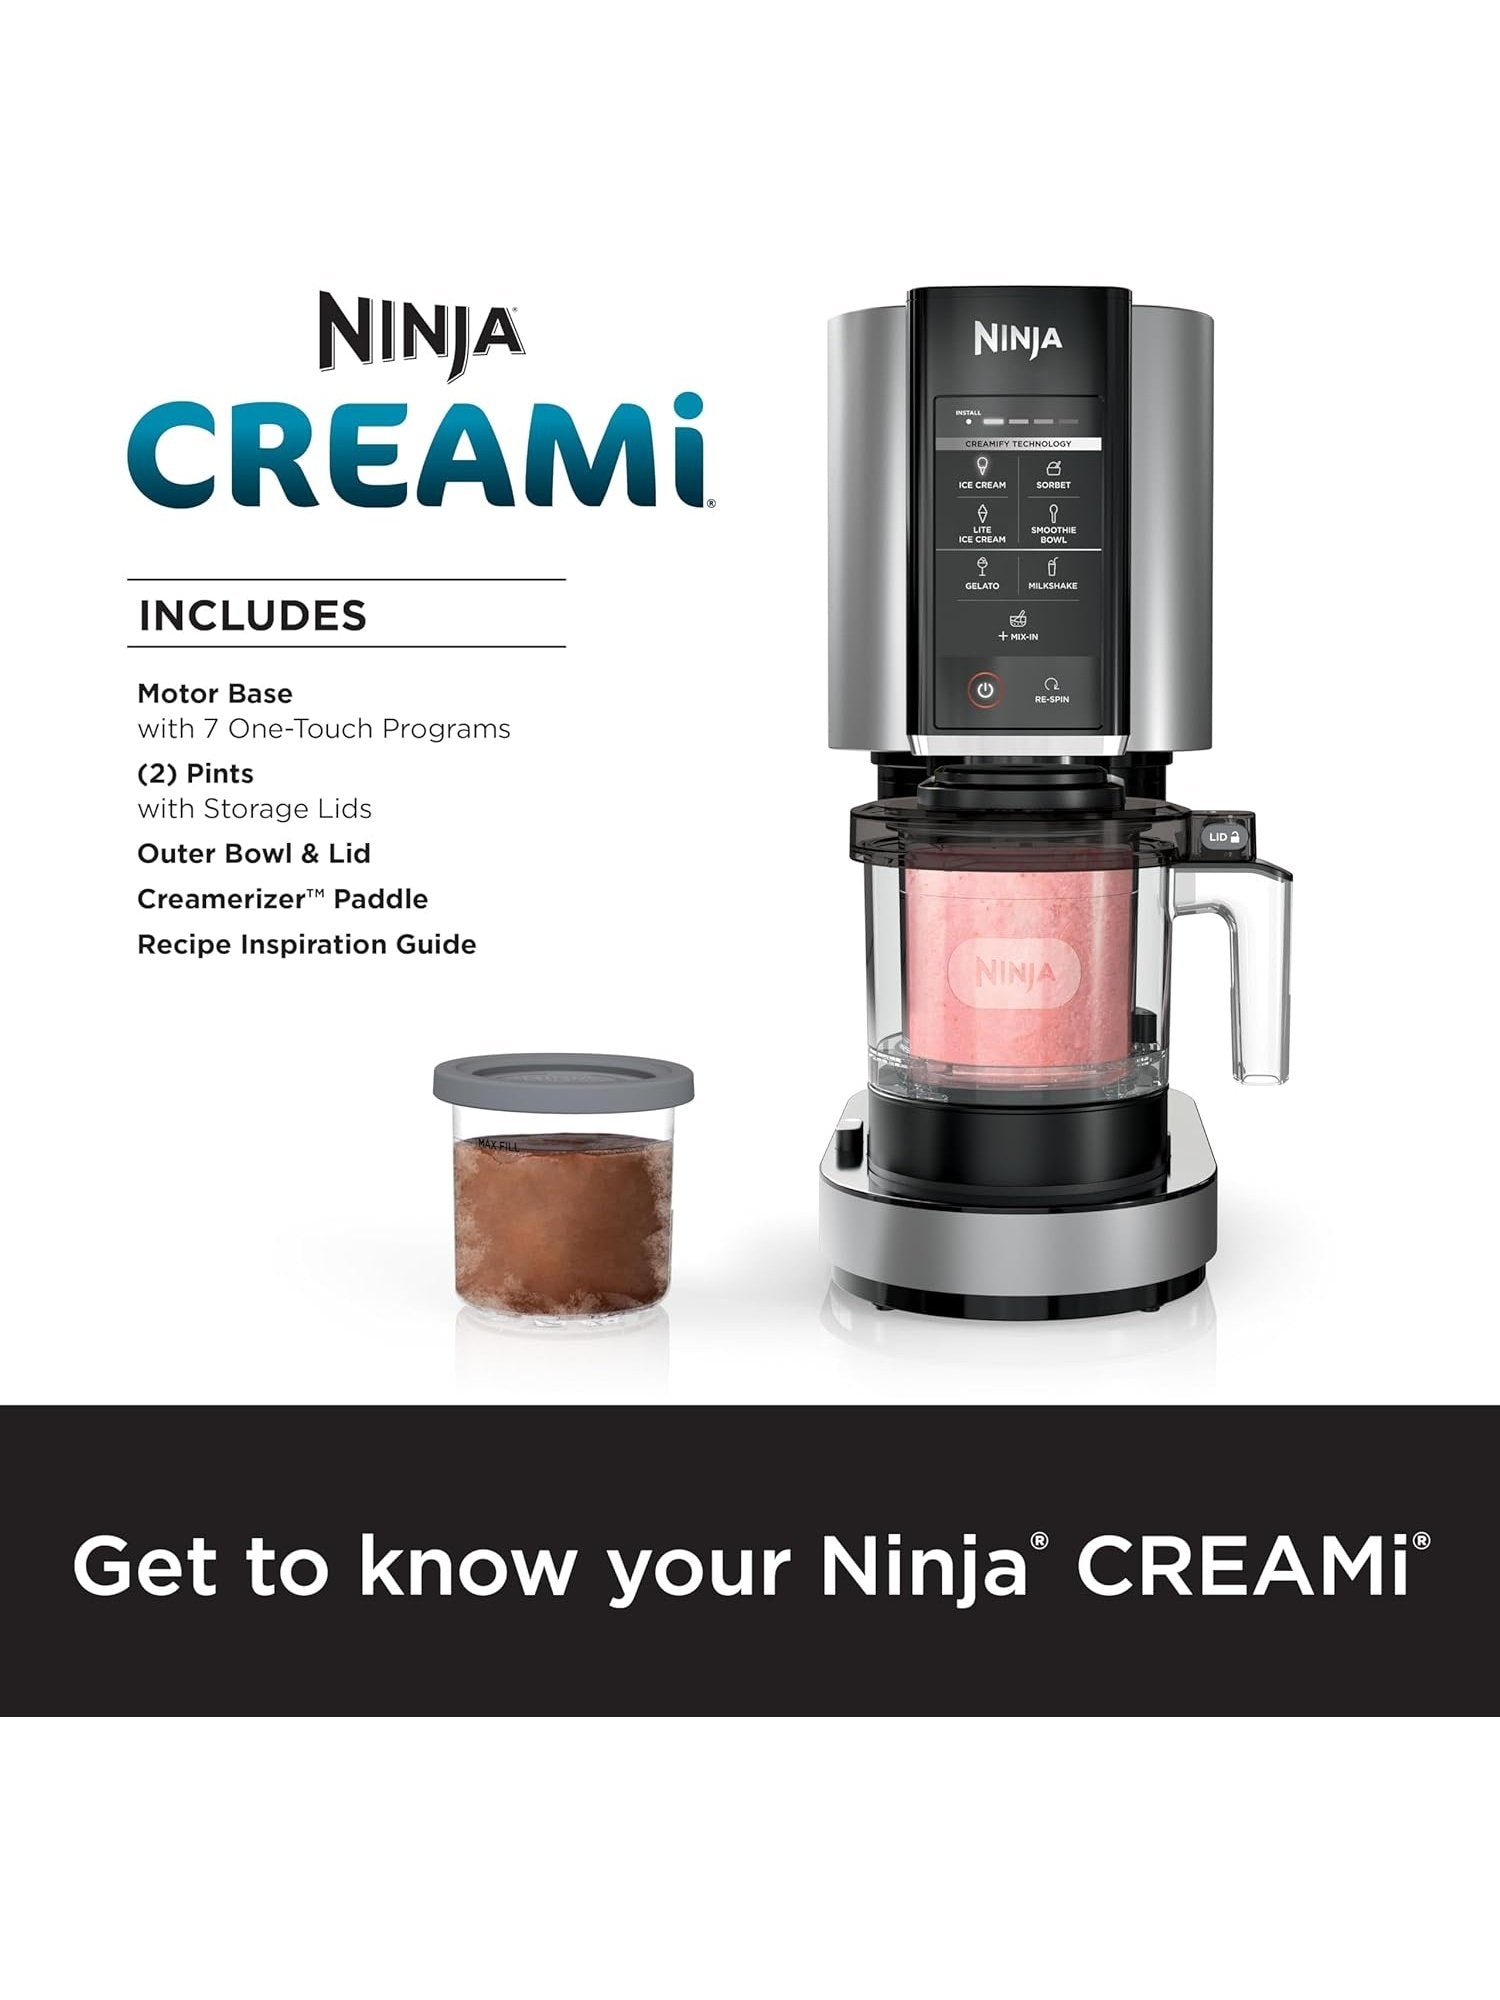 Ninja NC301 CREAMi Ice Cream Maker, for Gelato, Mix-ins, Milkshakes, Sorbet, Smoothie Bowls & More, 7 One-Touch Programs, with 2 Pint Containers & Lids, Compact Size, Perfect for Kids, Silver